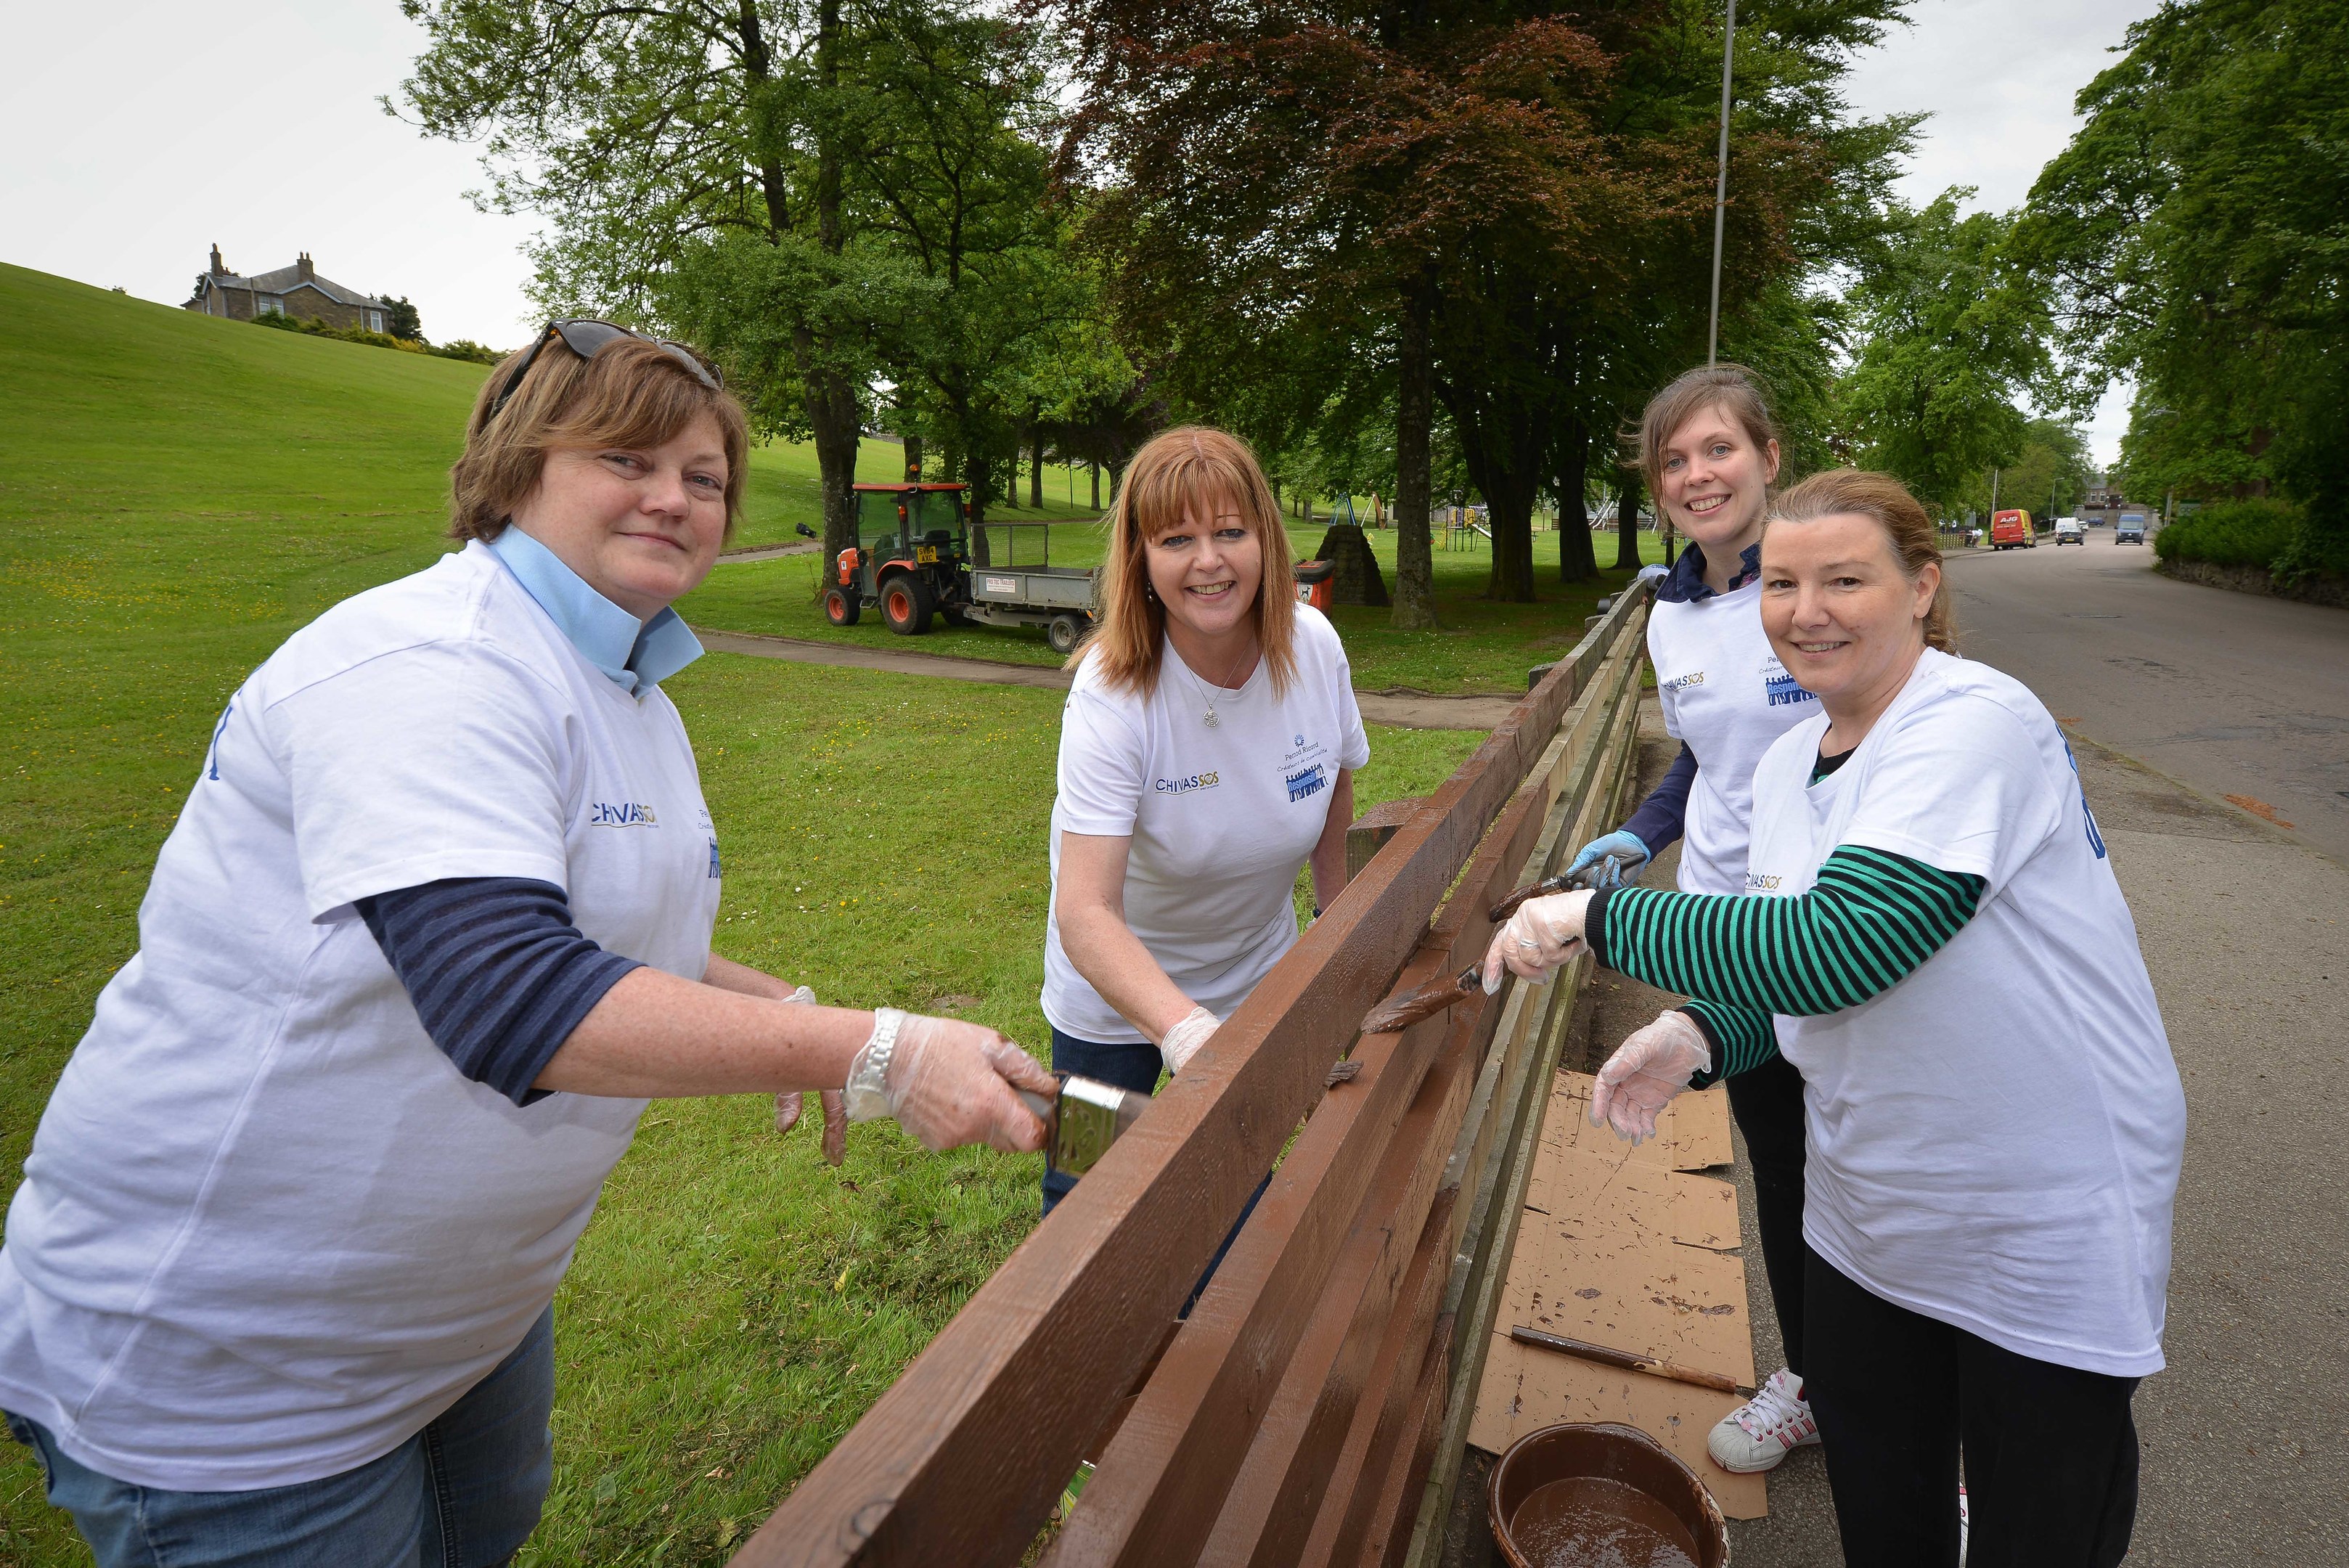 Chivas Brothers staff Linda Brown, Caroline Mitchell, Ashley Brown, Yvonne Thackeray got to work painting a new fence.